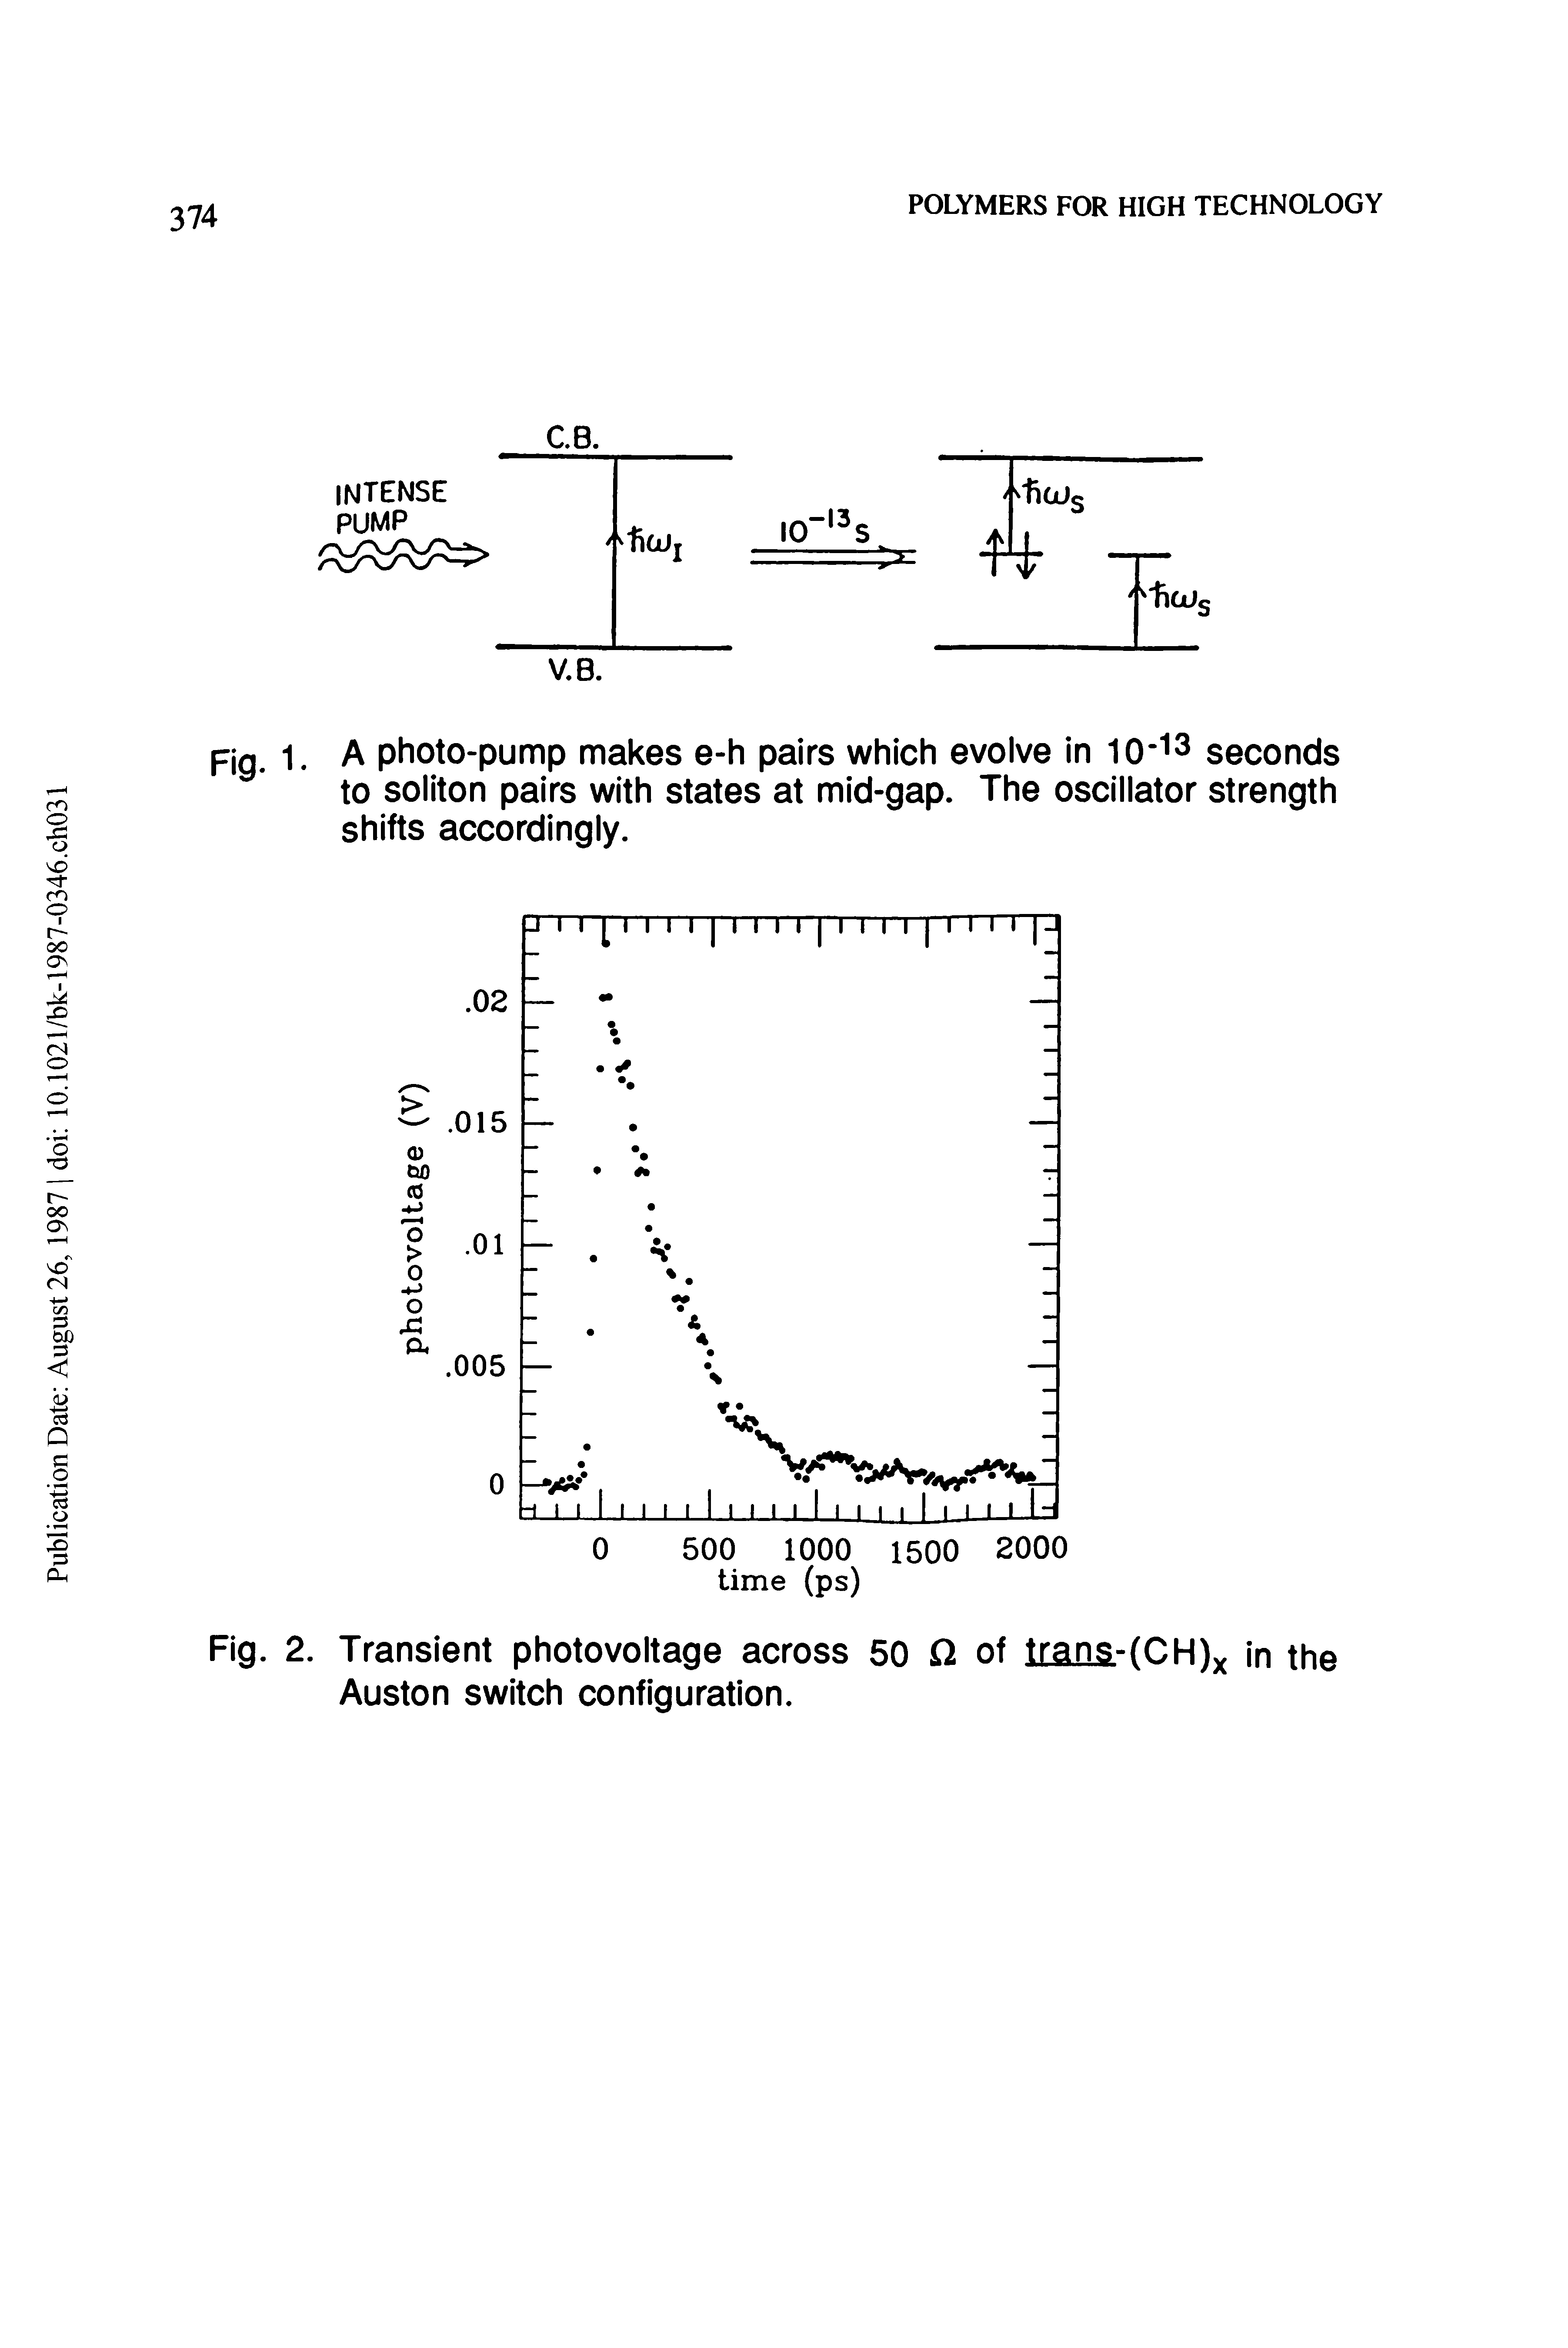 Fig. 2. Transient photovoltage across 50 Q of liana-(CH)x in the Auston switch configuration.